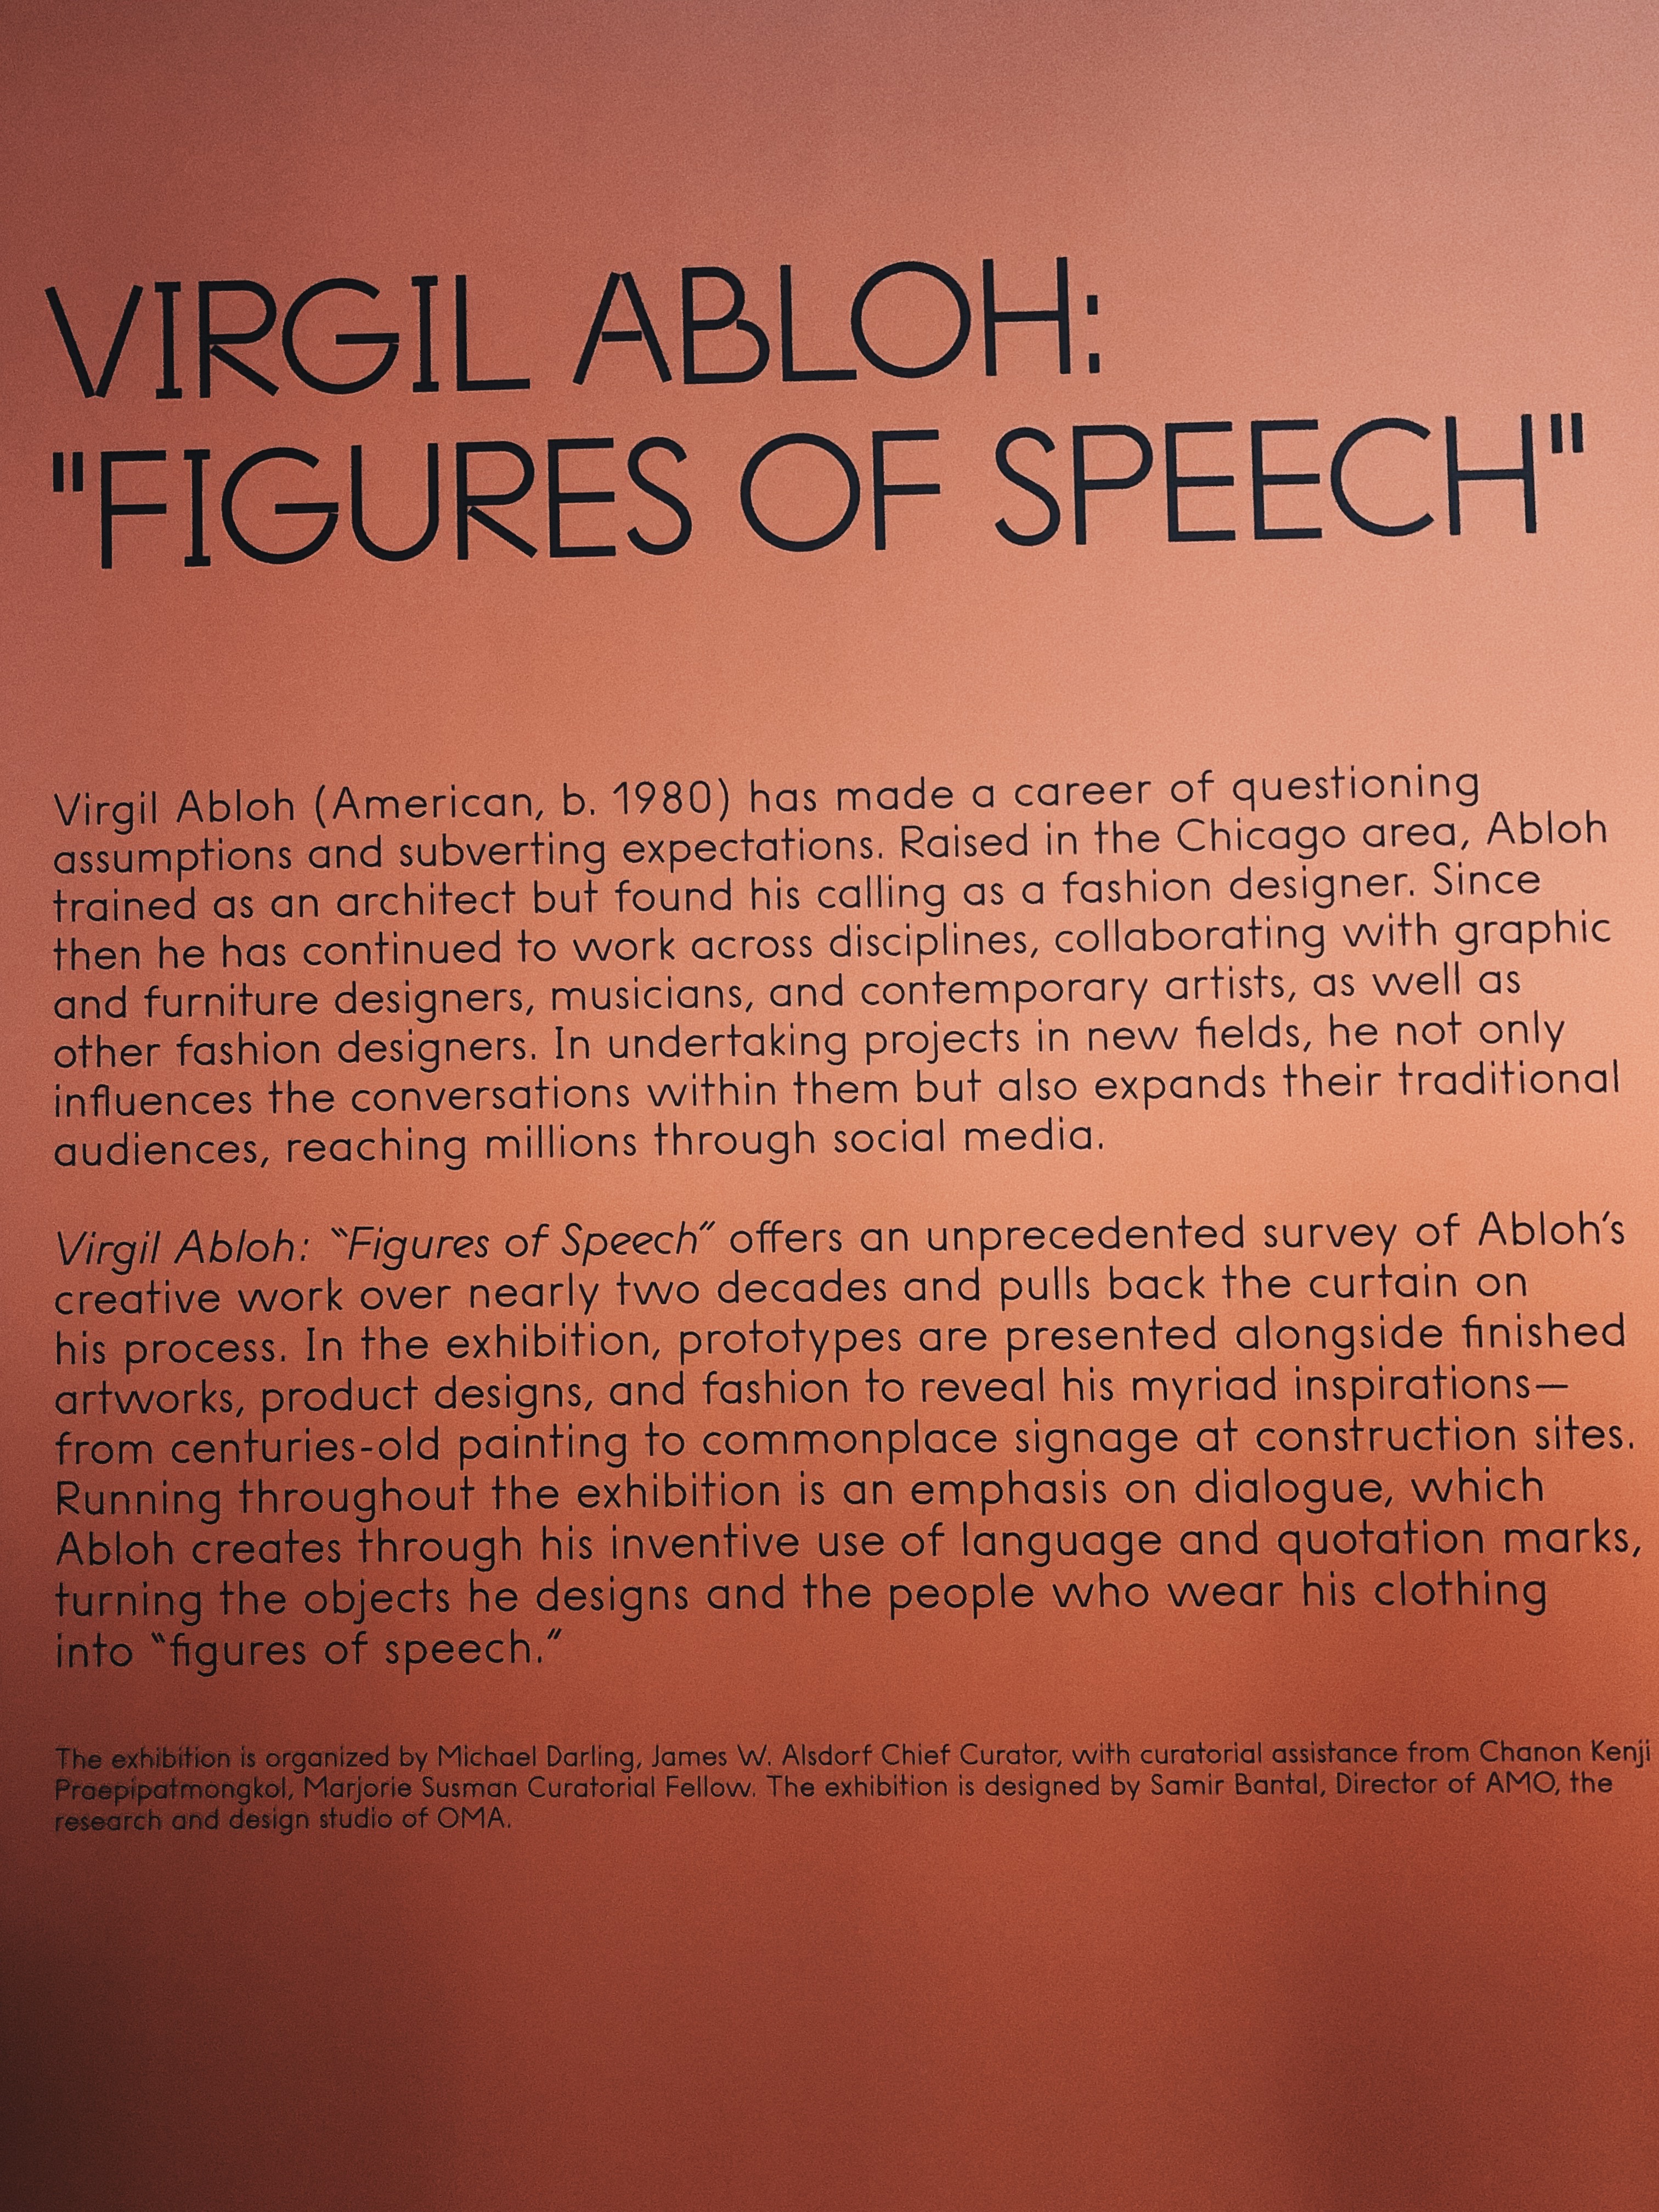 AMO Designs Exhibition for Virgil Abloh in Chicago, The Strength of  Architecture